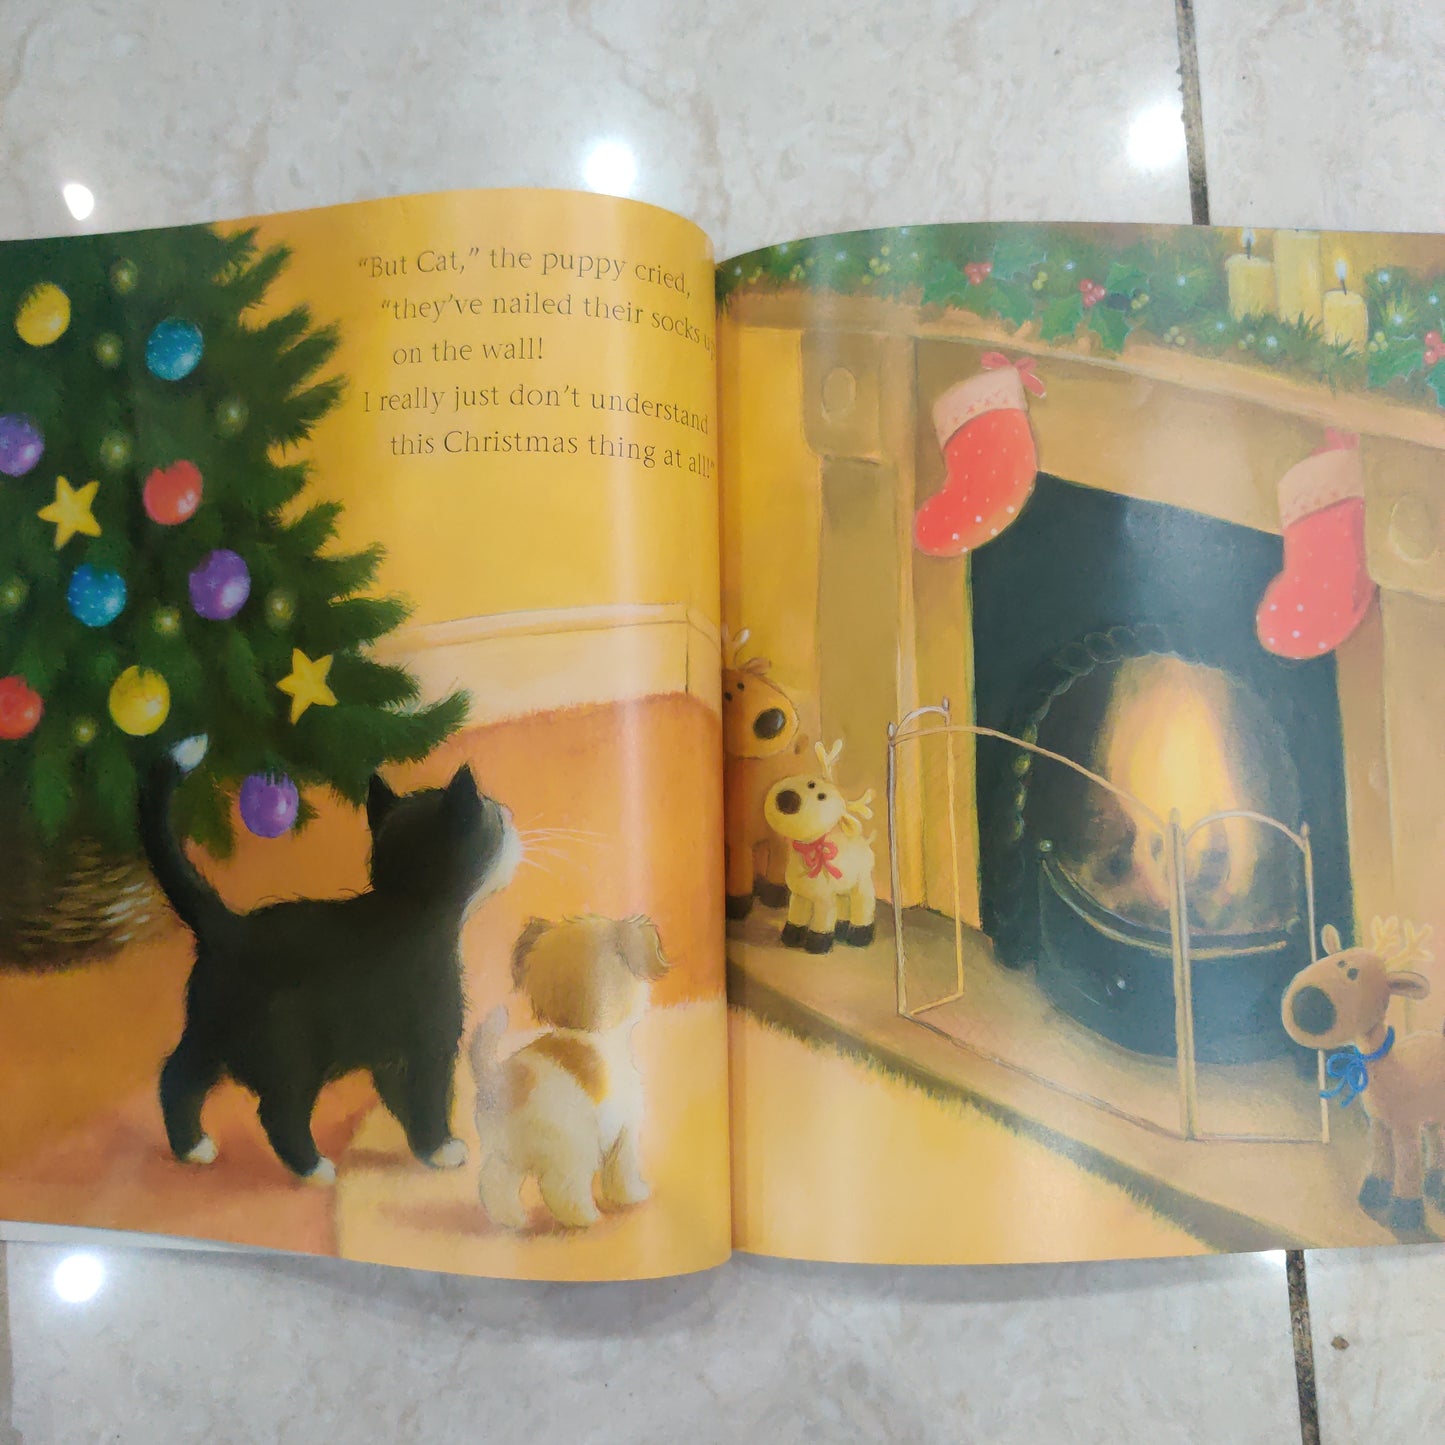 Puppy's First Christmas | Paperback